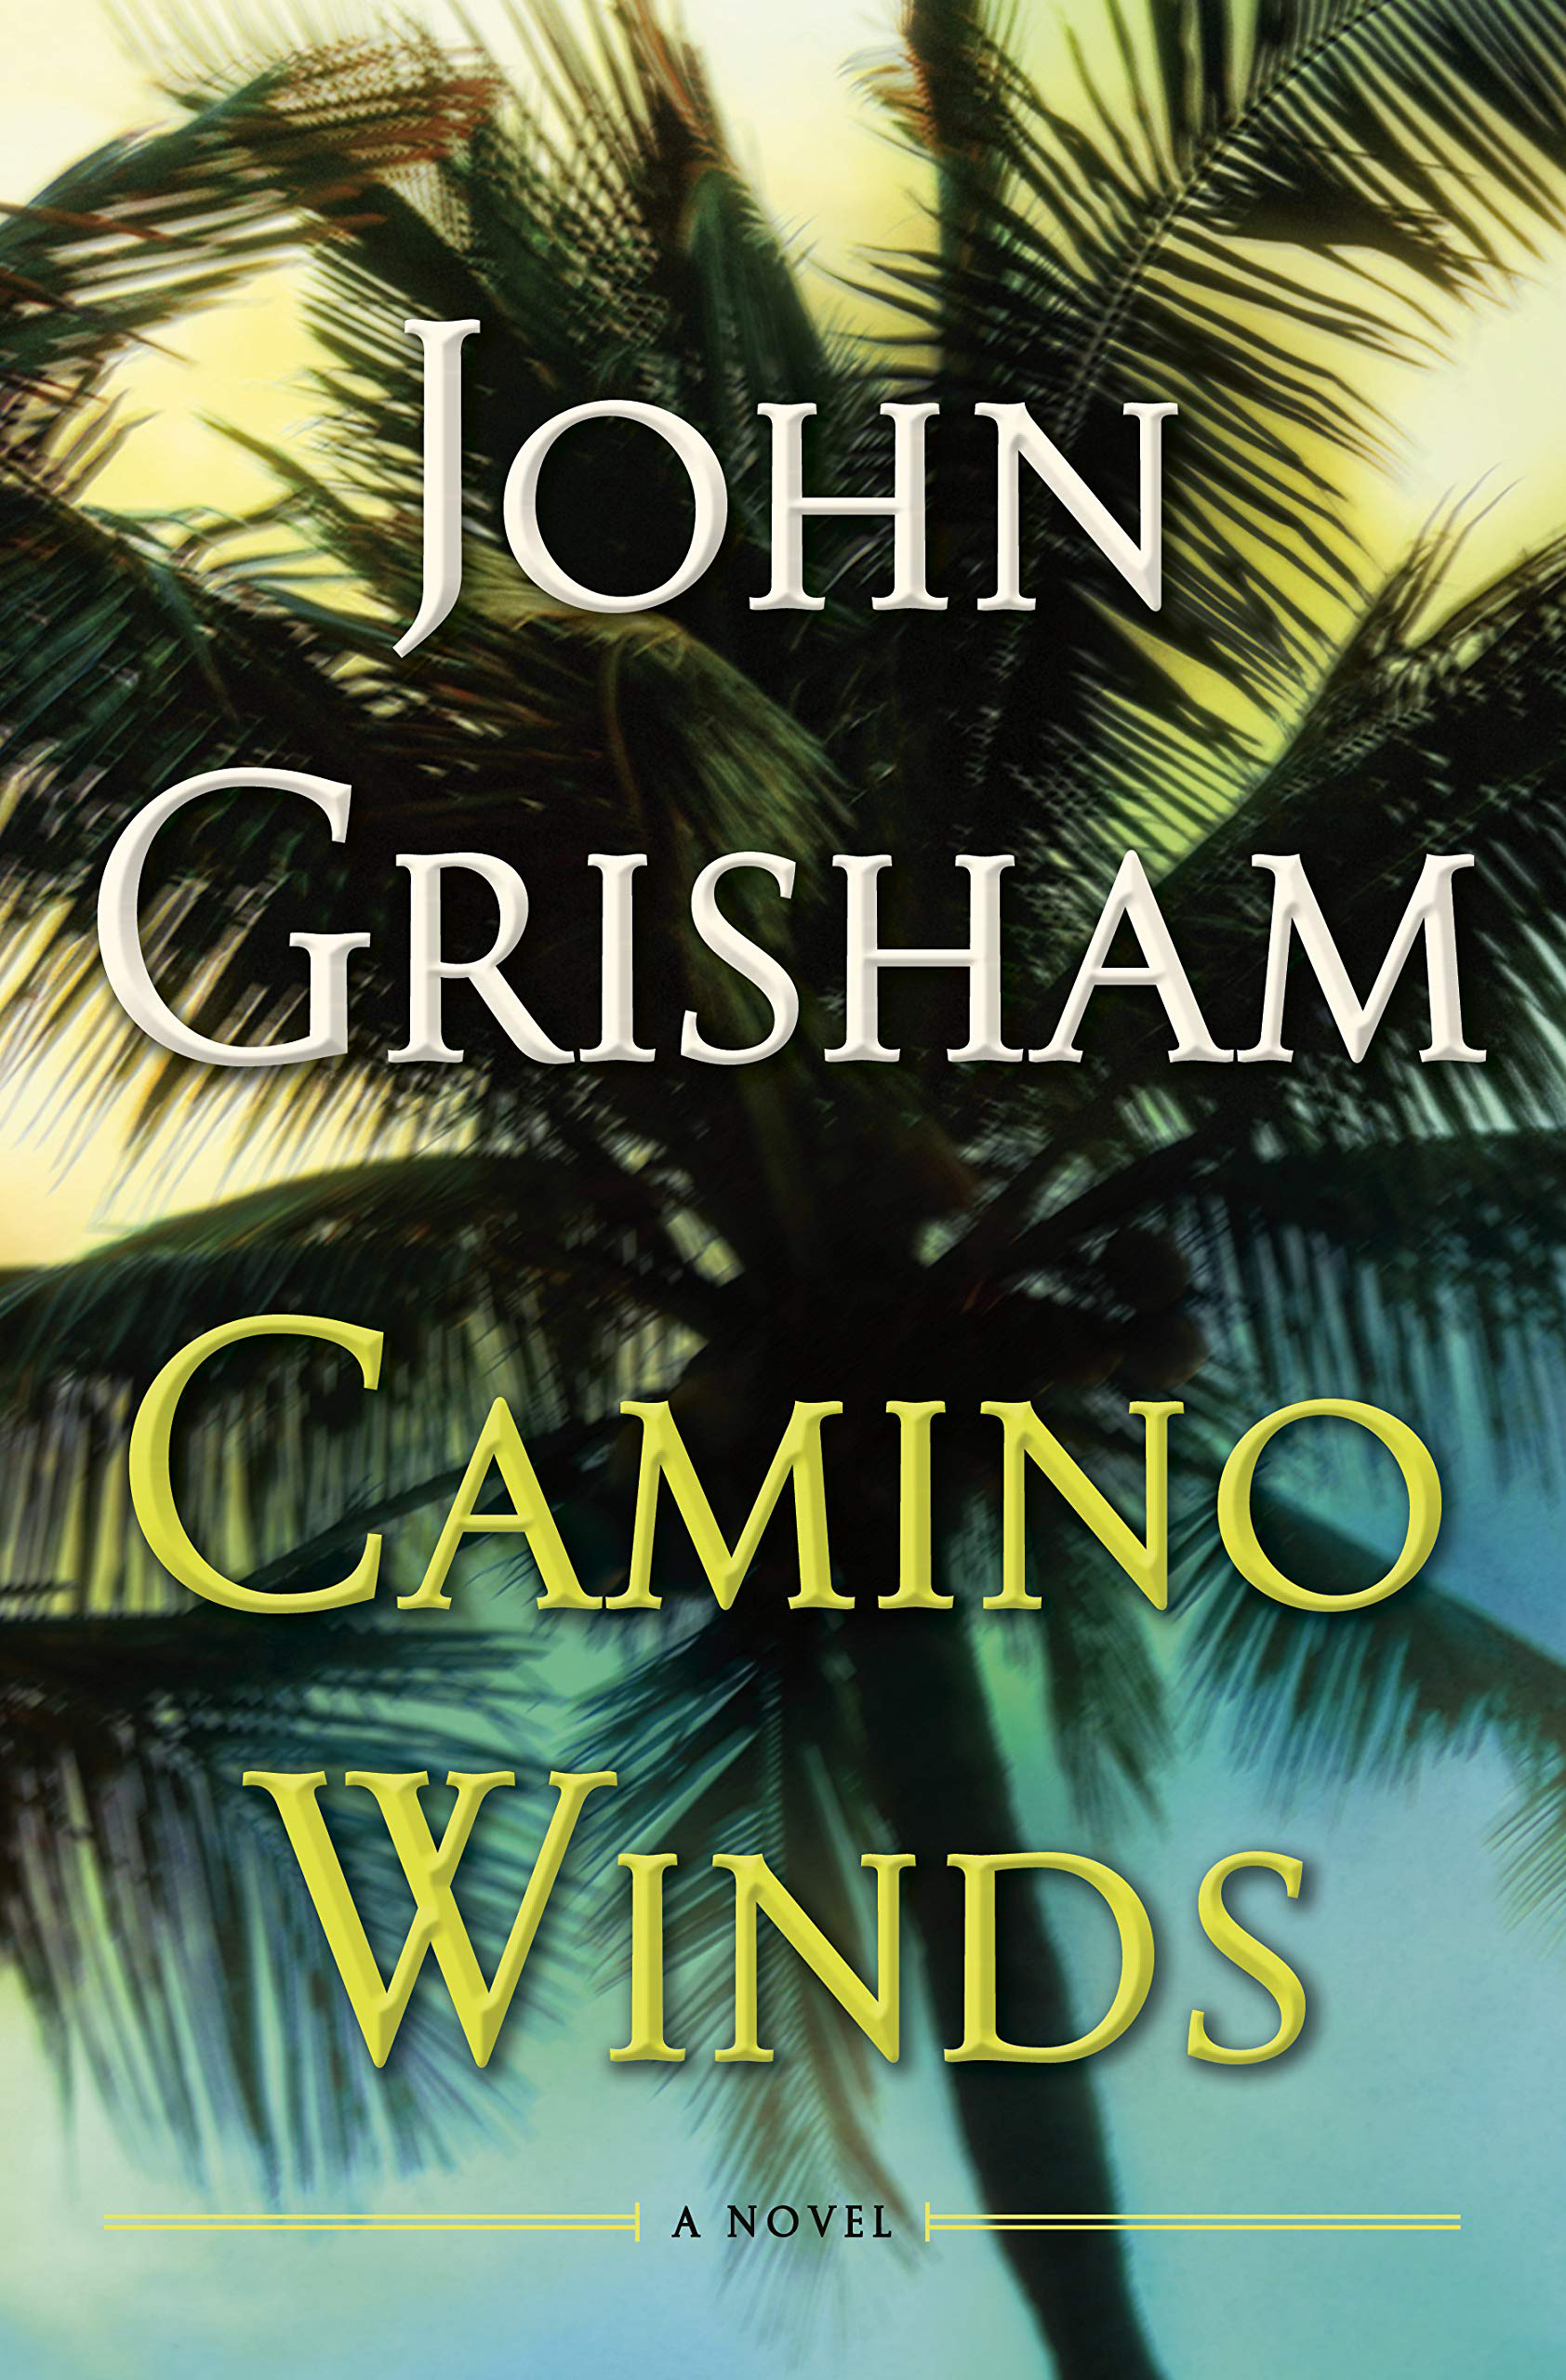 2020: In John Grisham's novel, "Camino Winds," a murder in the midst of a hurricane might prove to be the perfect crime.